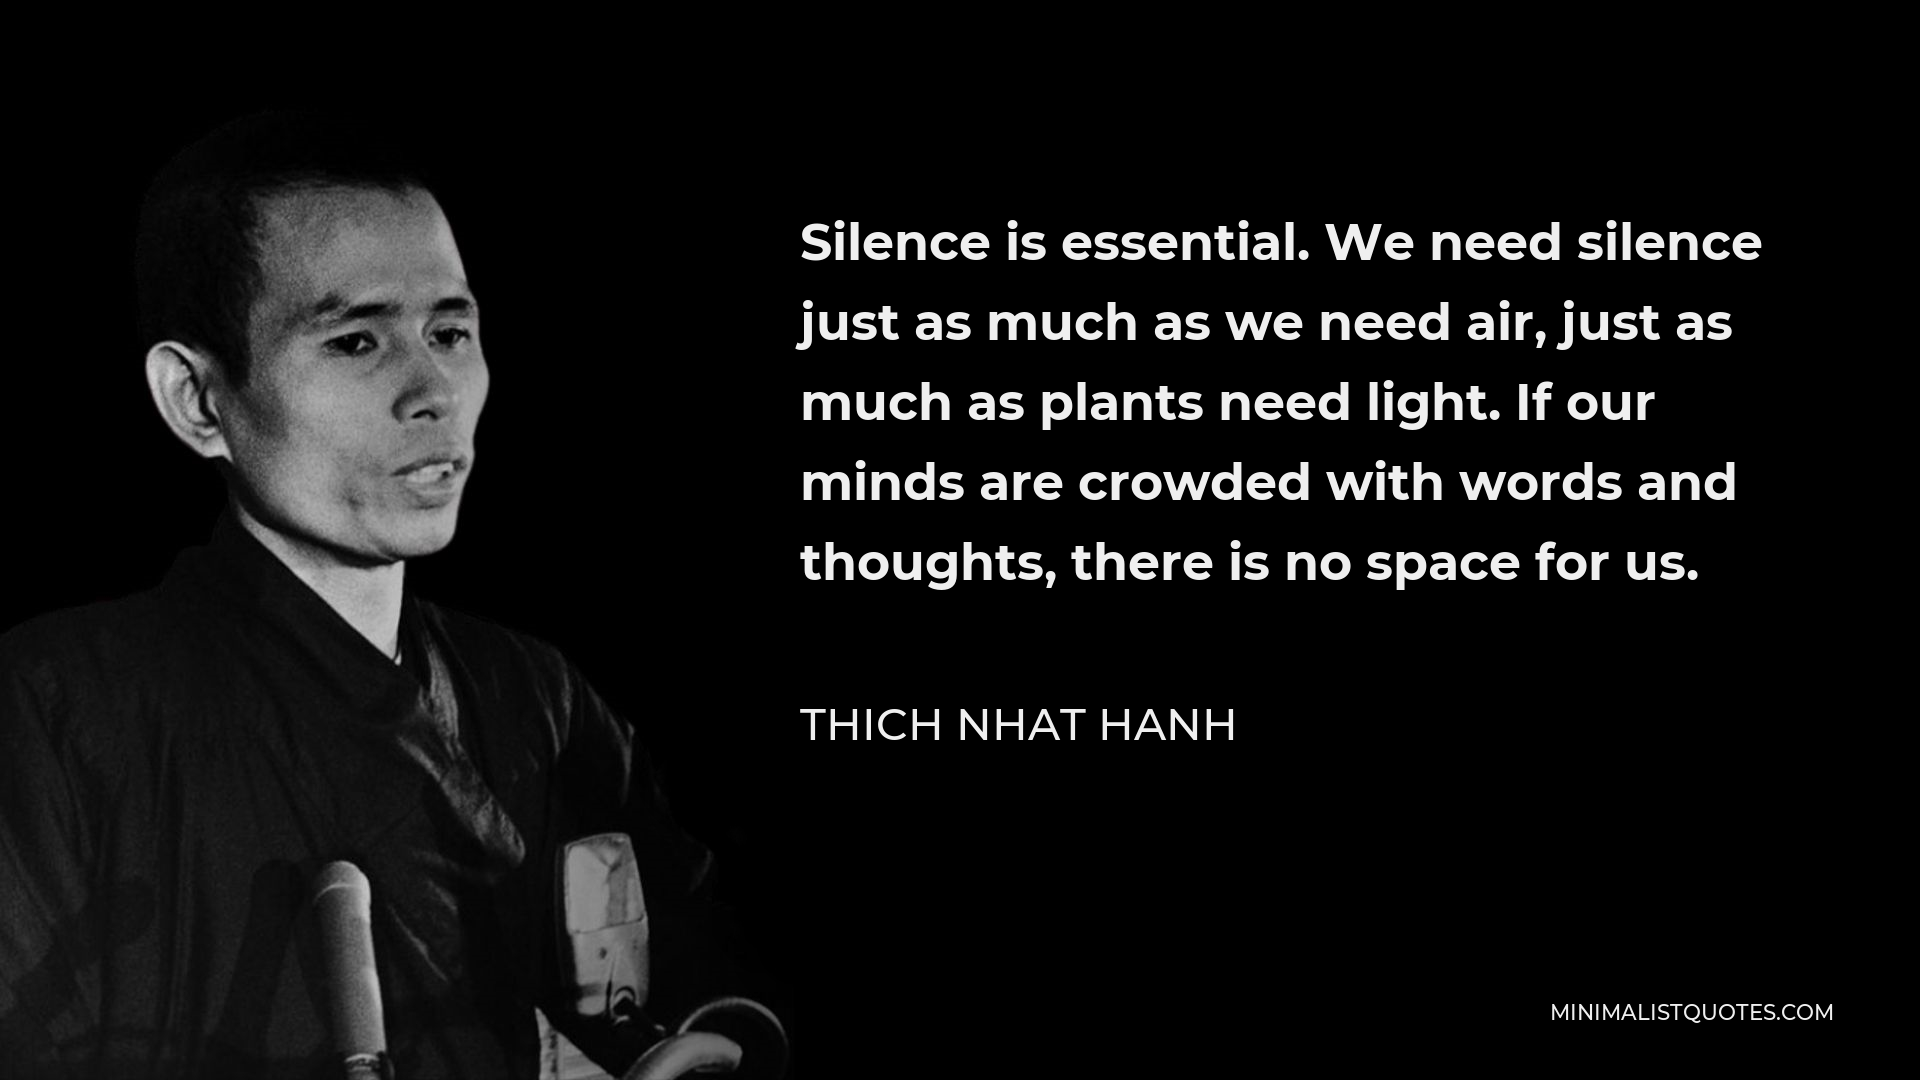 Thich Nhat Hanh Quote - Silence is essential. We need silence just as much as we need air, just as much as plants need light. If our minds are crowded with words and thoughts, there is no space for us.